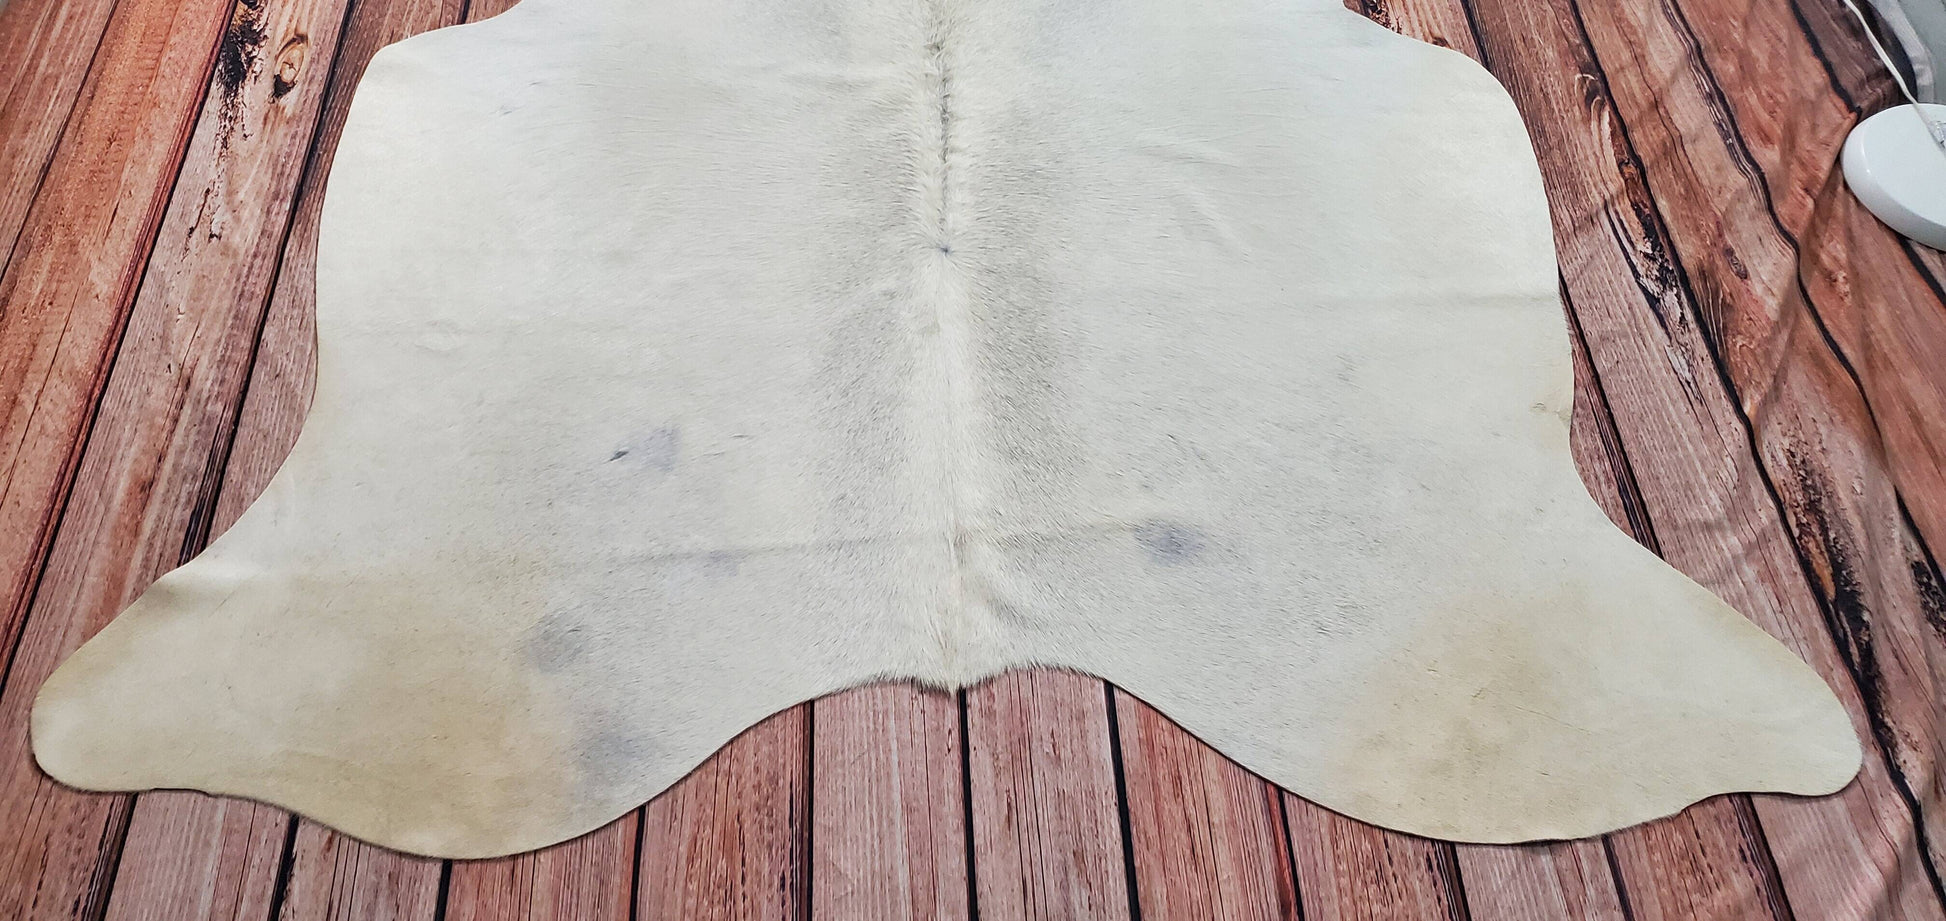 This grey ivory cowhide rug can function well in a variety of different settings, such as on a front porch or inside as a dining room floor